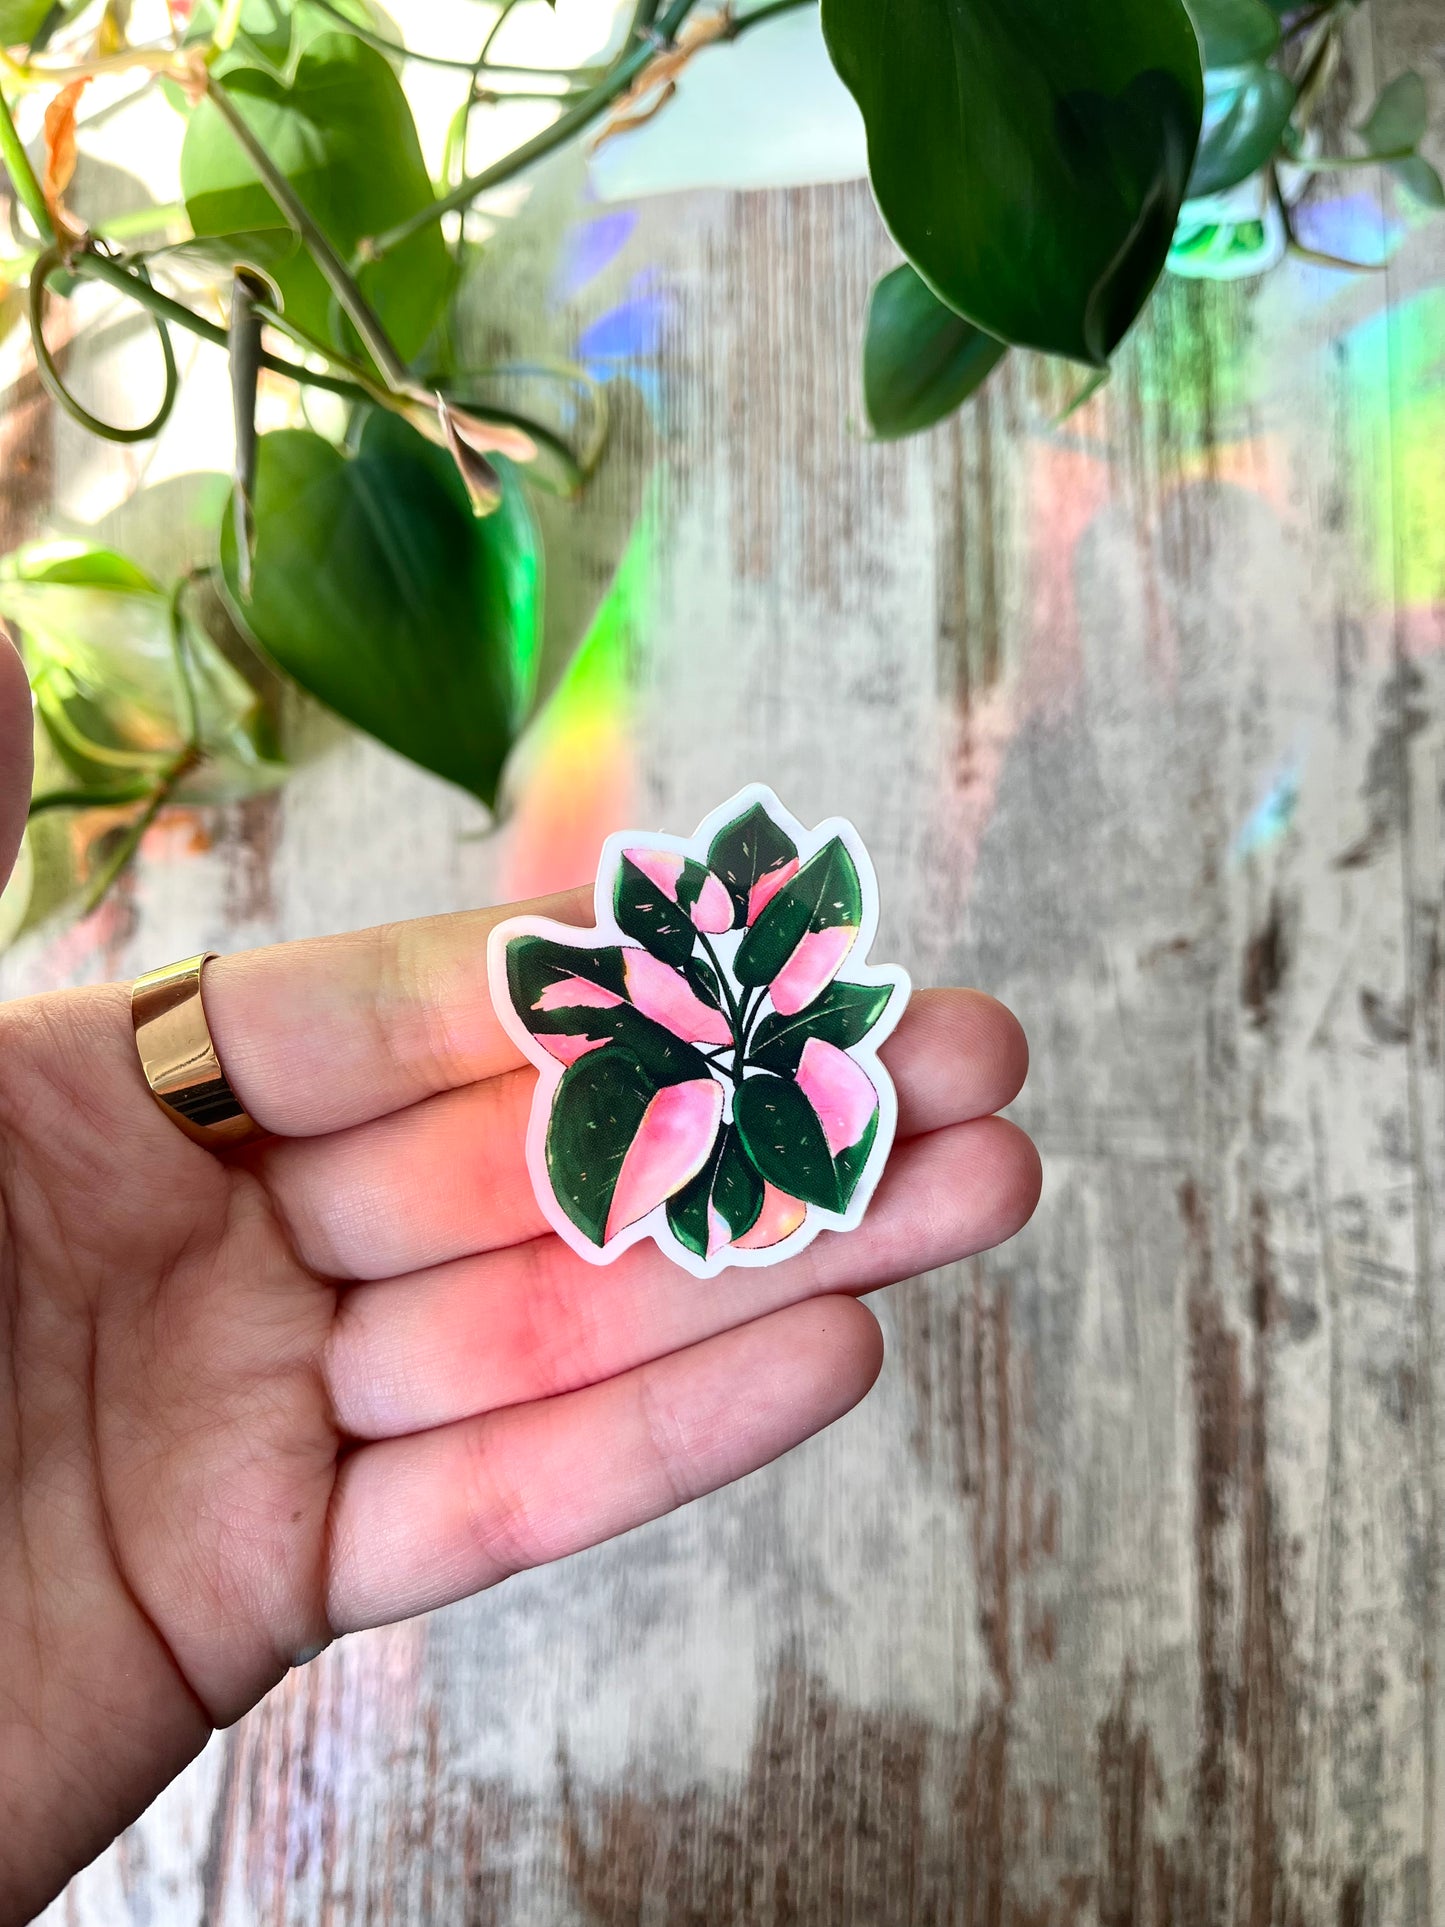 Sticker - Philodendron Pink Princess